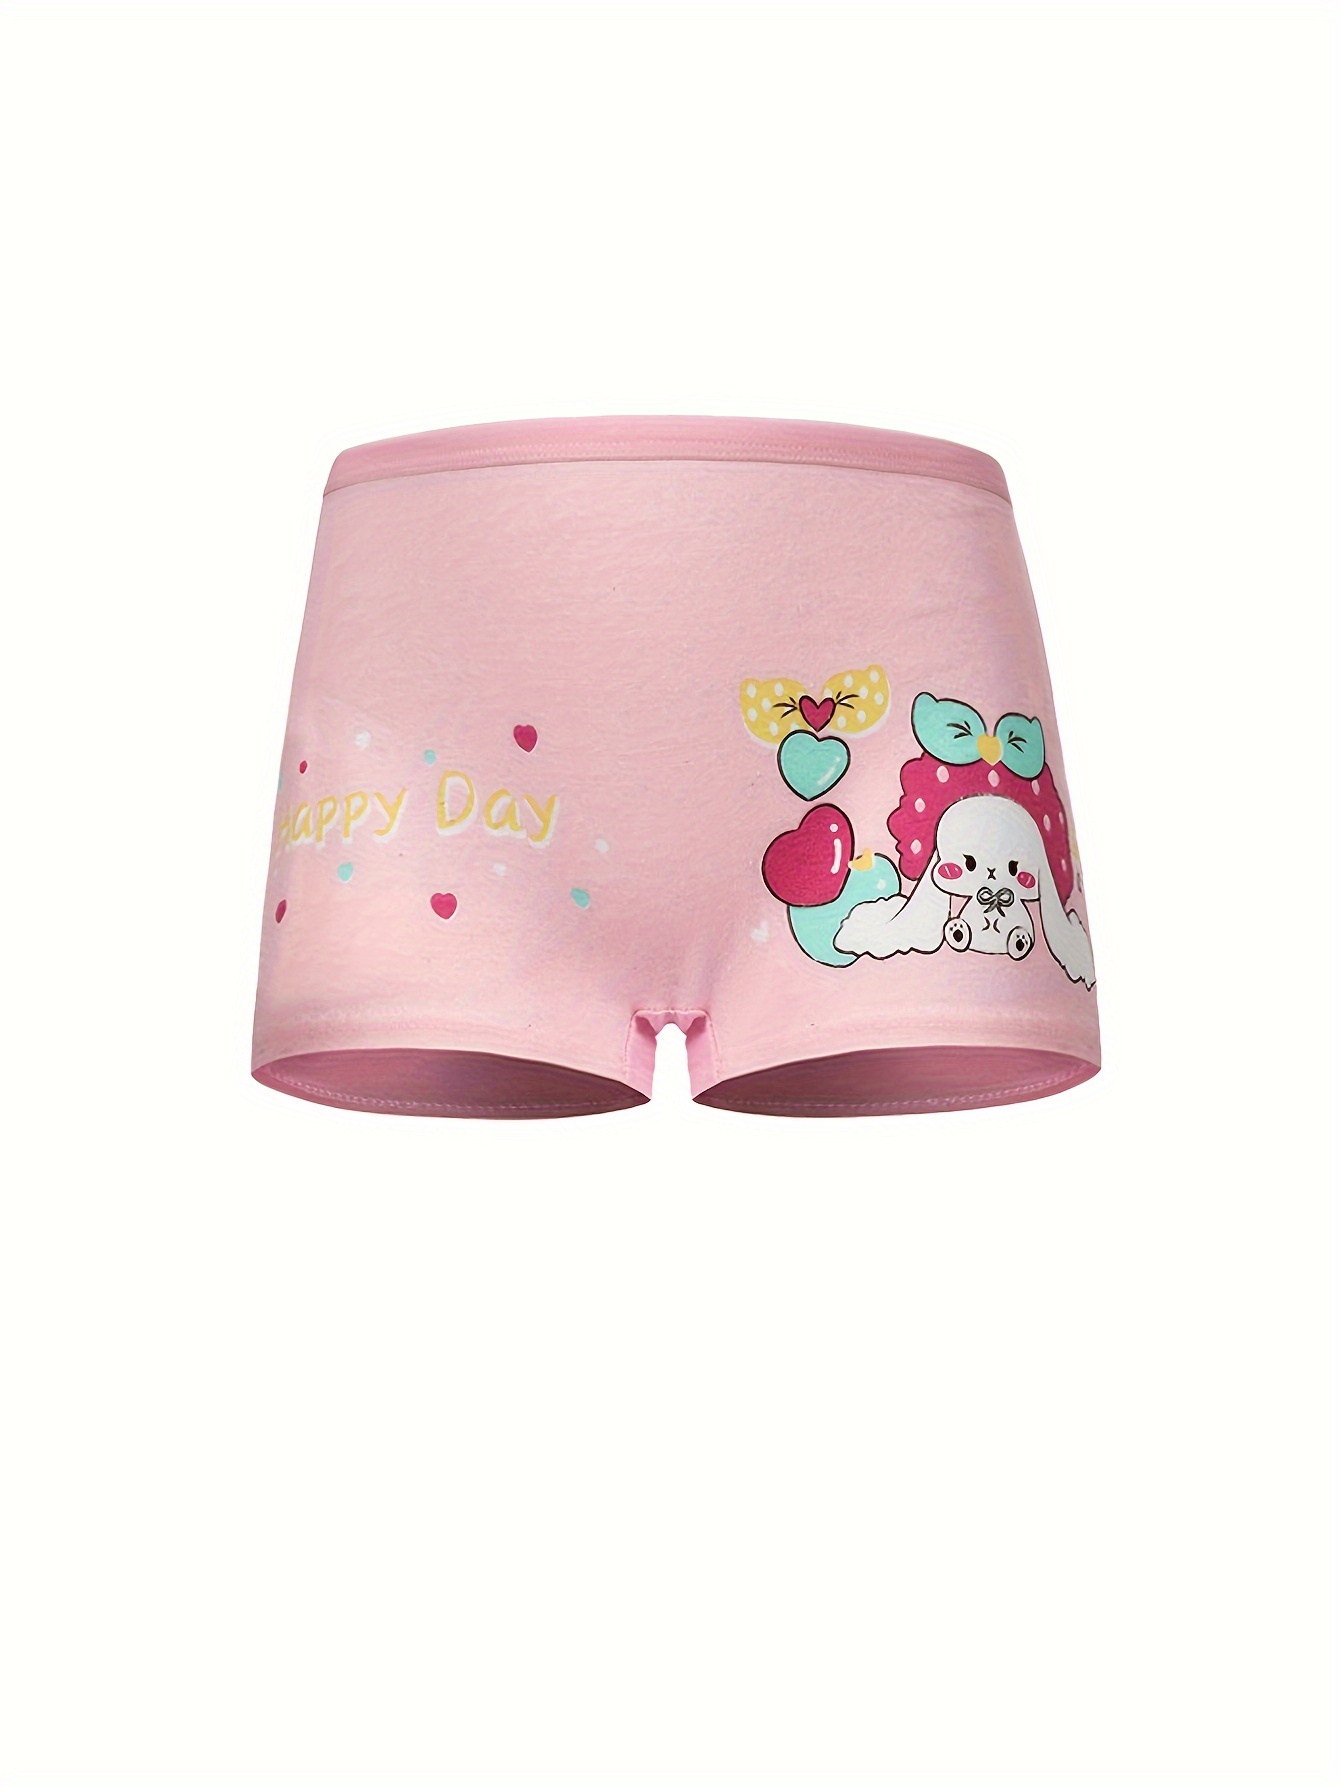 3-8 Year Old Girls Underwear Cotton Breathable New Baby Girl